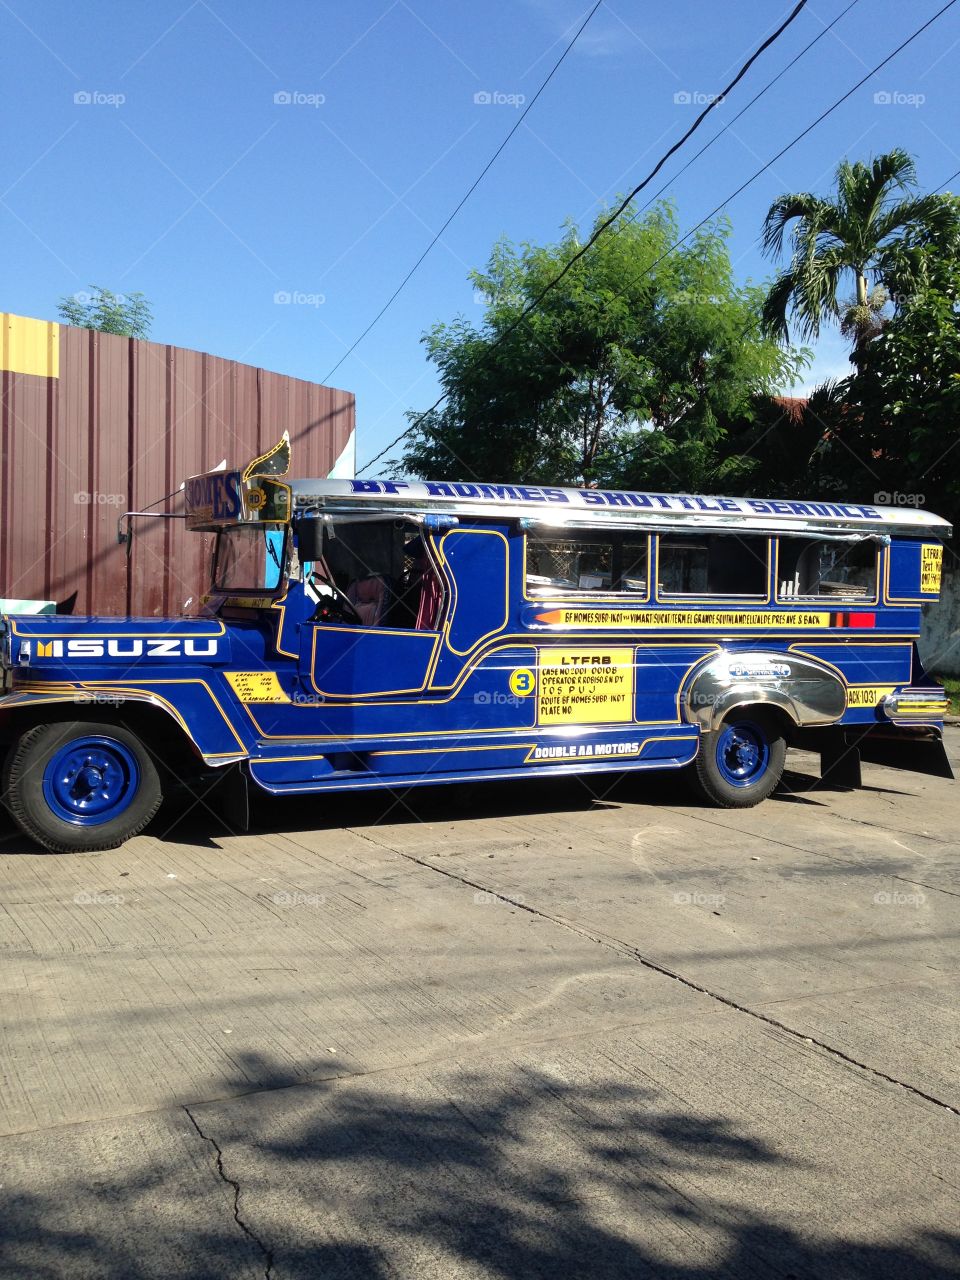 this is a jeepney a means of transport you can find only in the Philippines. It has long history having started right after world war two when the military jeeps were converted into jeepneys. they were only half the length of the present designs